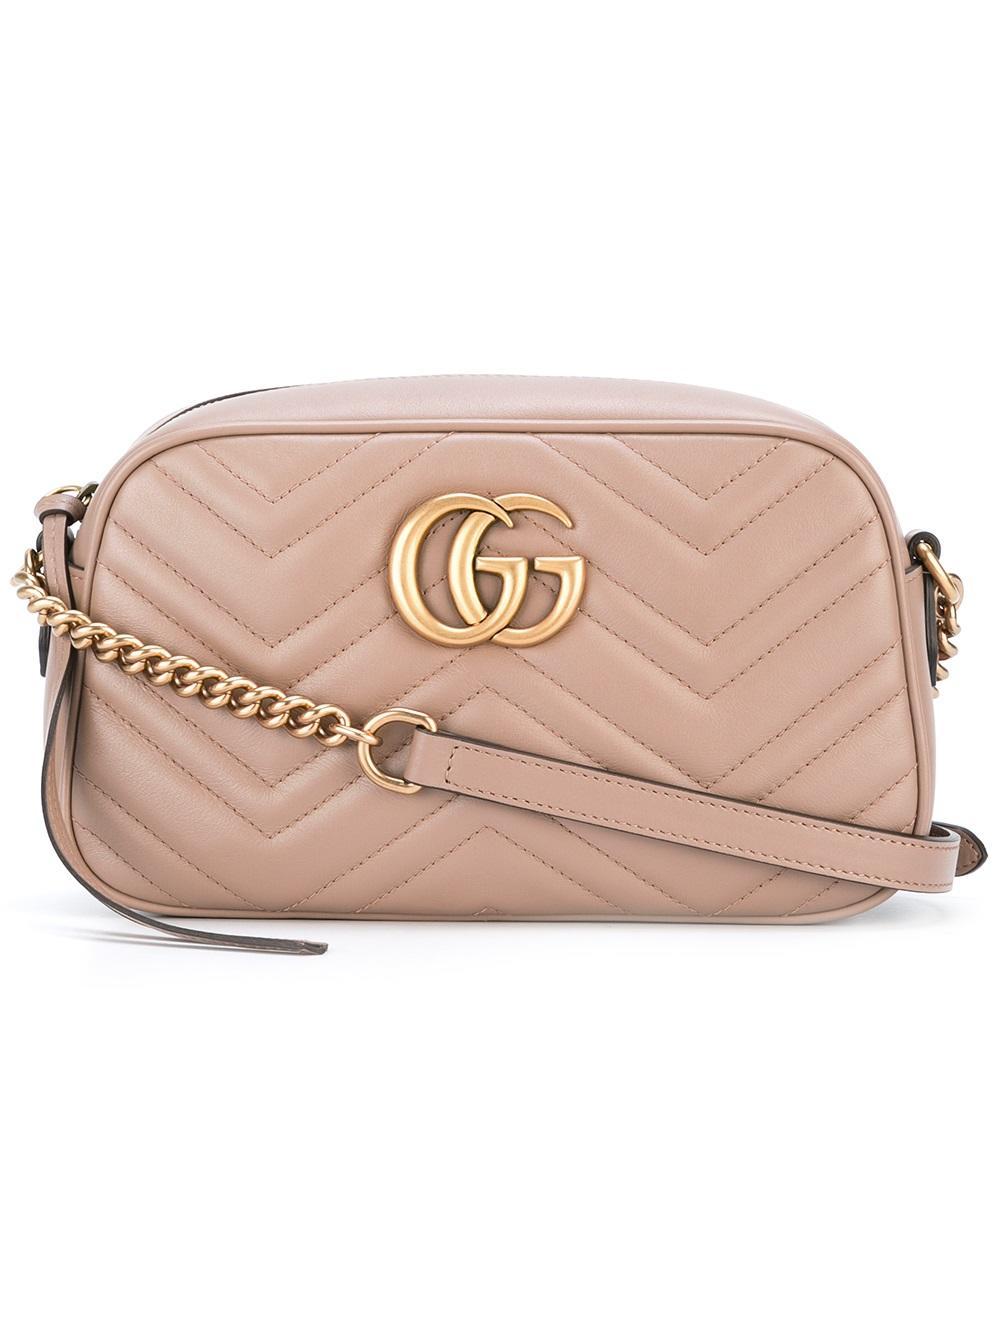 Lyst - Gucci Gg Marmont Crossbody Bag in Brown